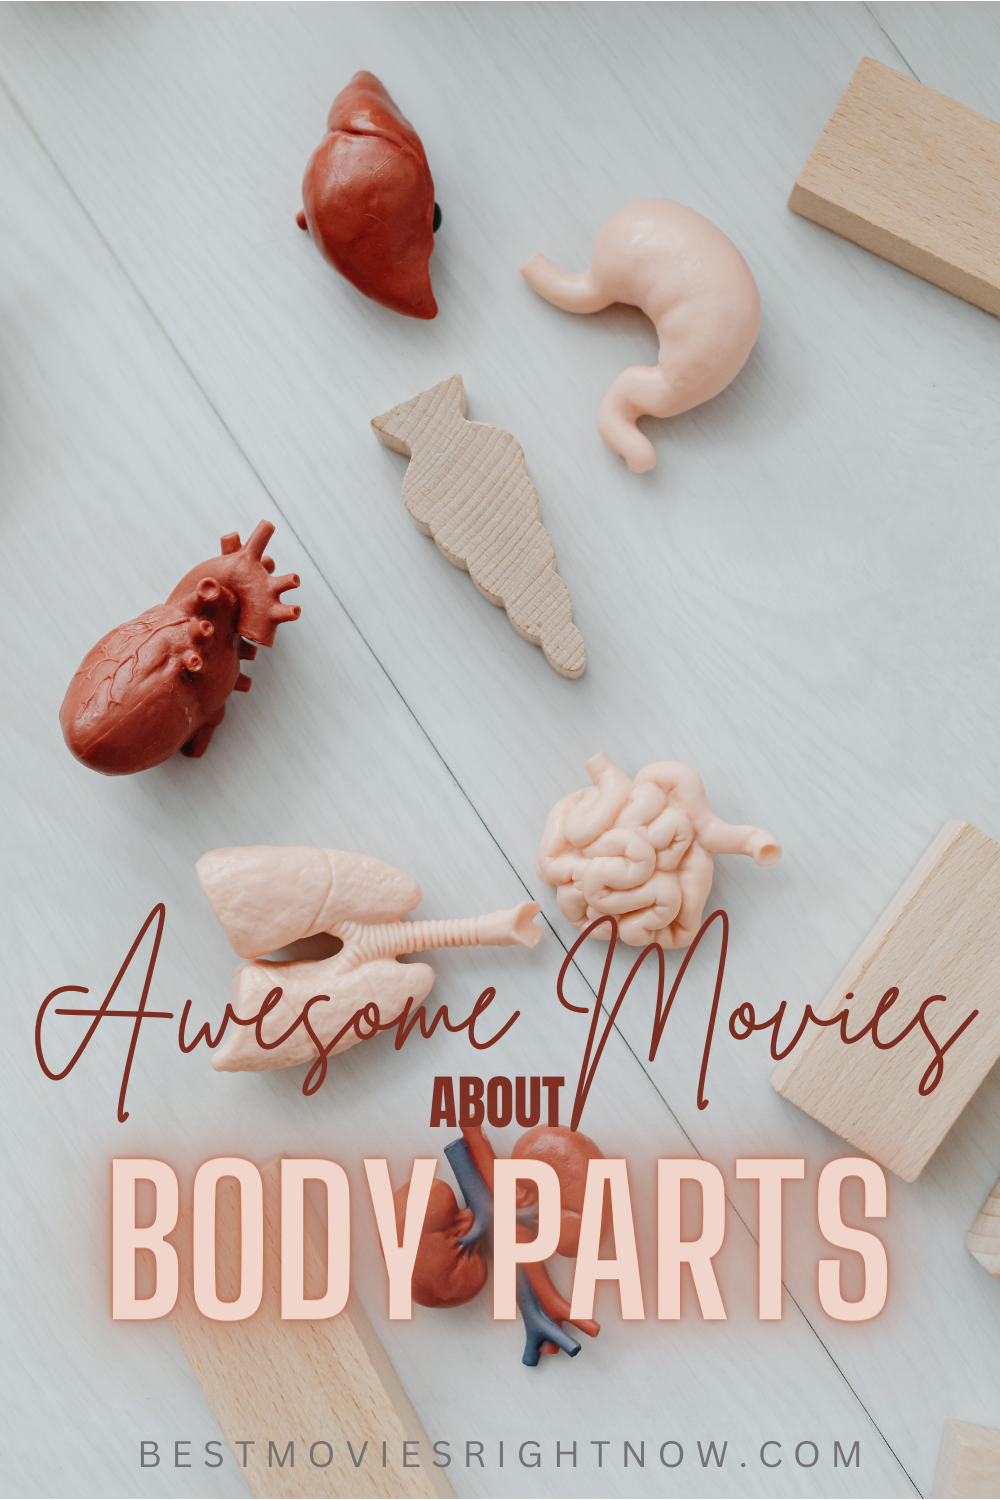 a picture of human organ models with caption "Awesome Movies About Body Parts"